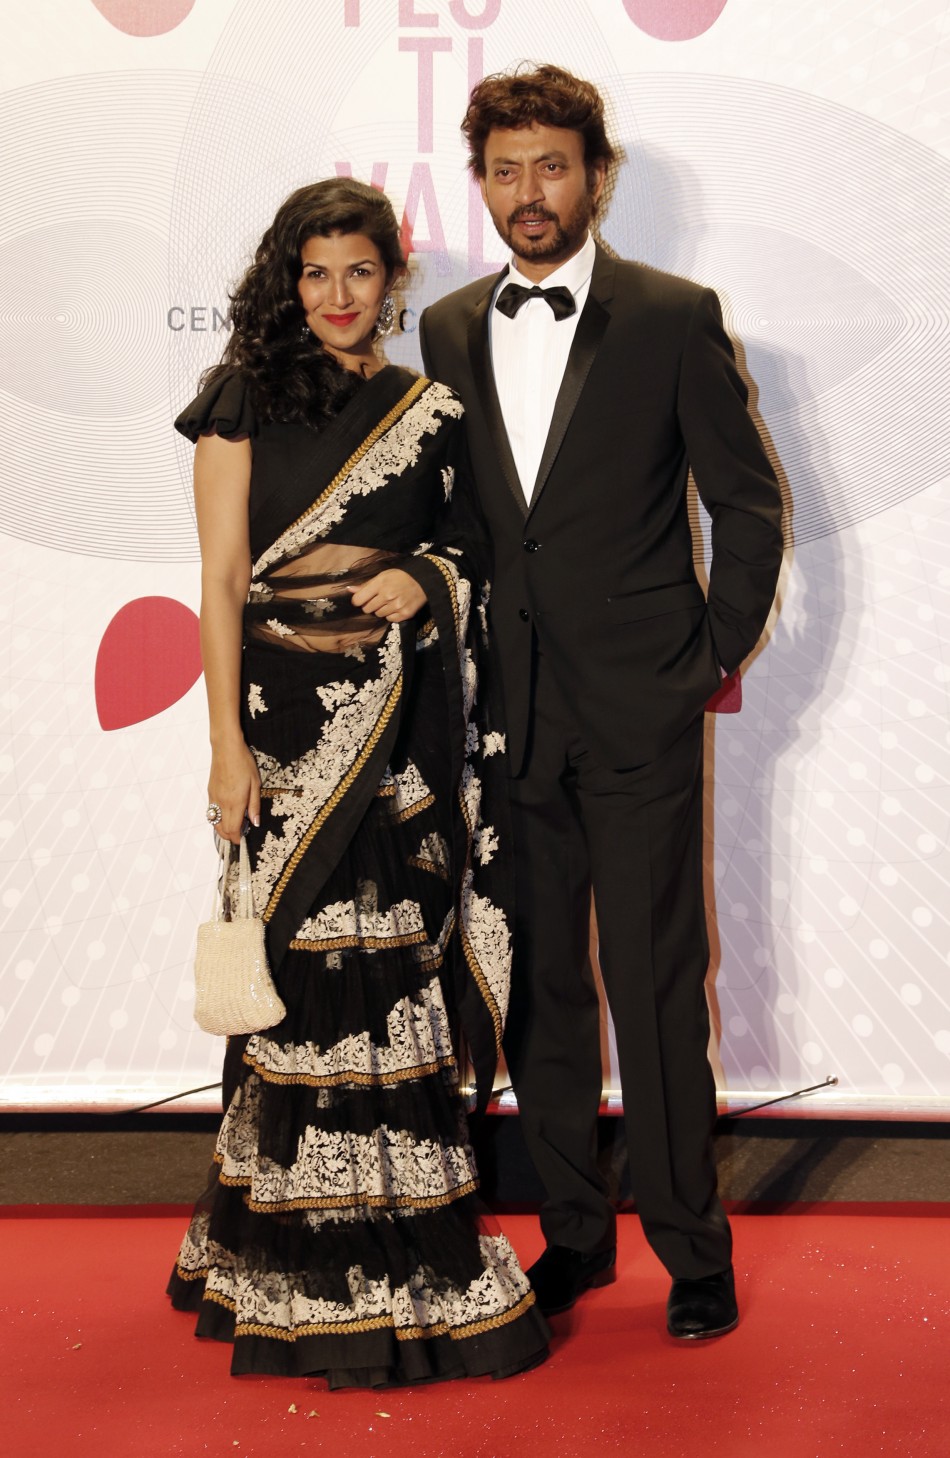 Actress Nimrit Kaur L and actor Irrfan Khan pose as they arrive at the evenings gala of the film Bombay Talkies celebrating a hundred years of Indian cinema, during the 66th Cannes Film Festival in Cannes May 19, 2013